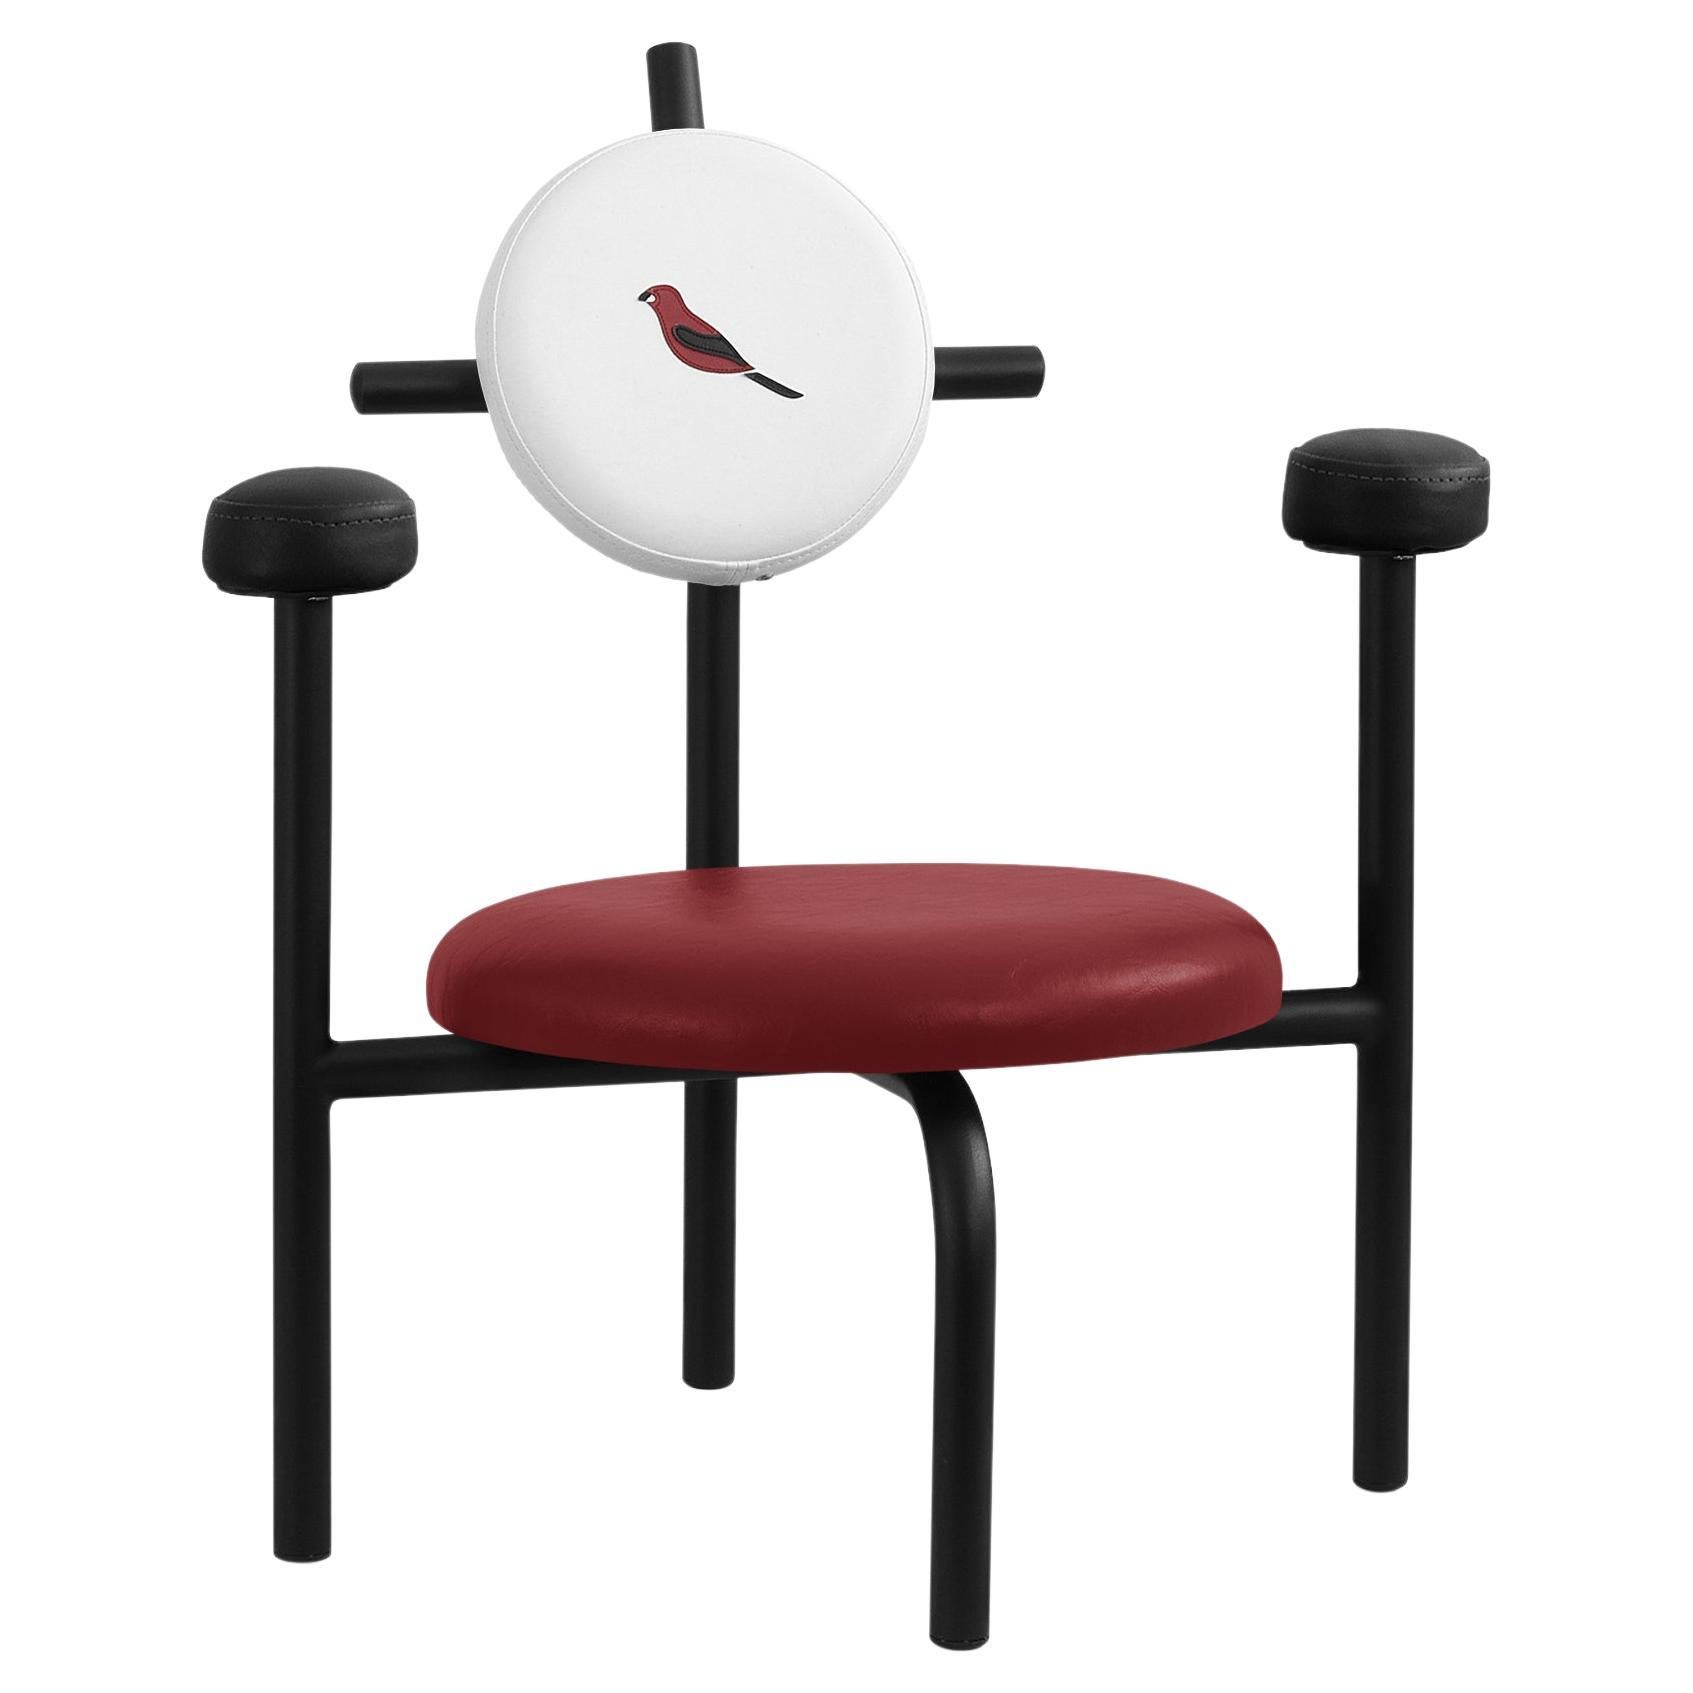 PK18 Impermeable Armchair, Red Seat & Black Metal Structure by Paulo Kobylka